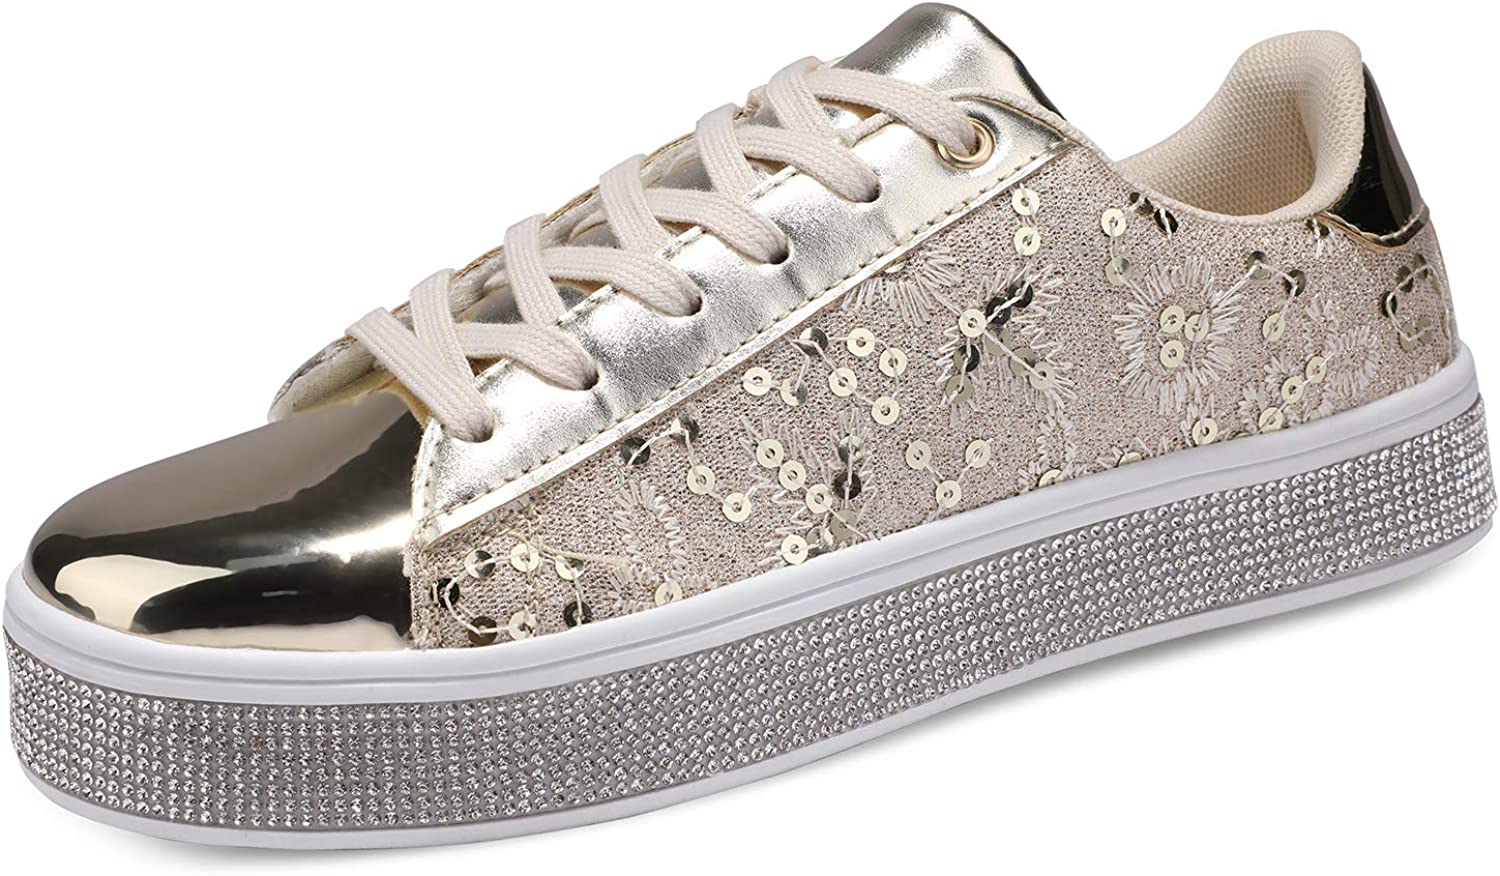 UUBARIS Women's Glitter Tennis Sneakers Floral Dressy Sparkly